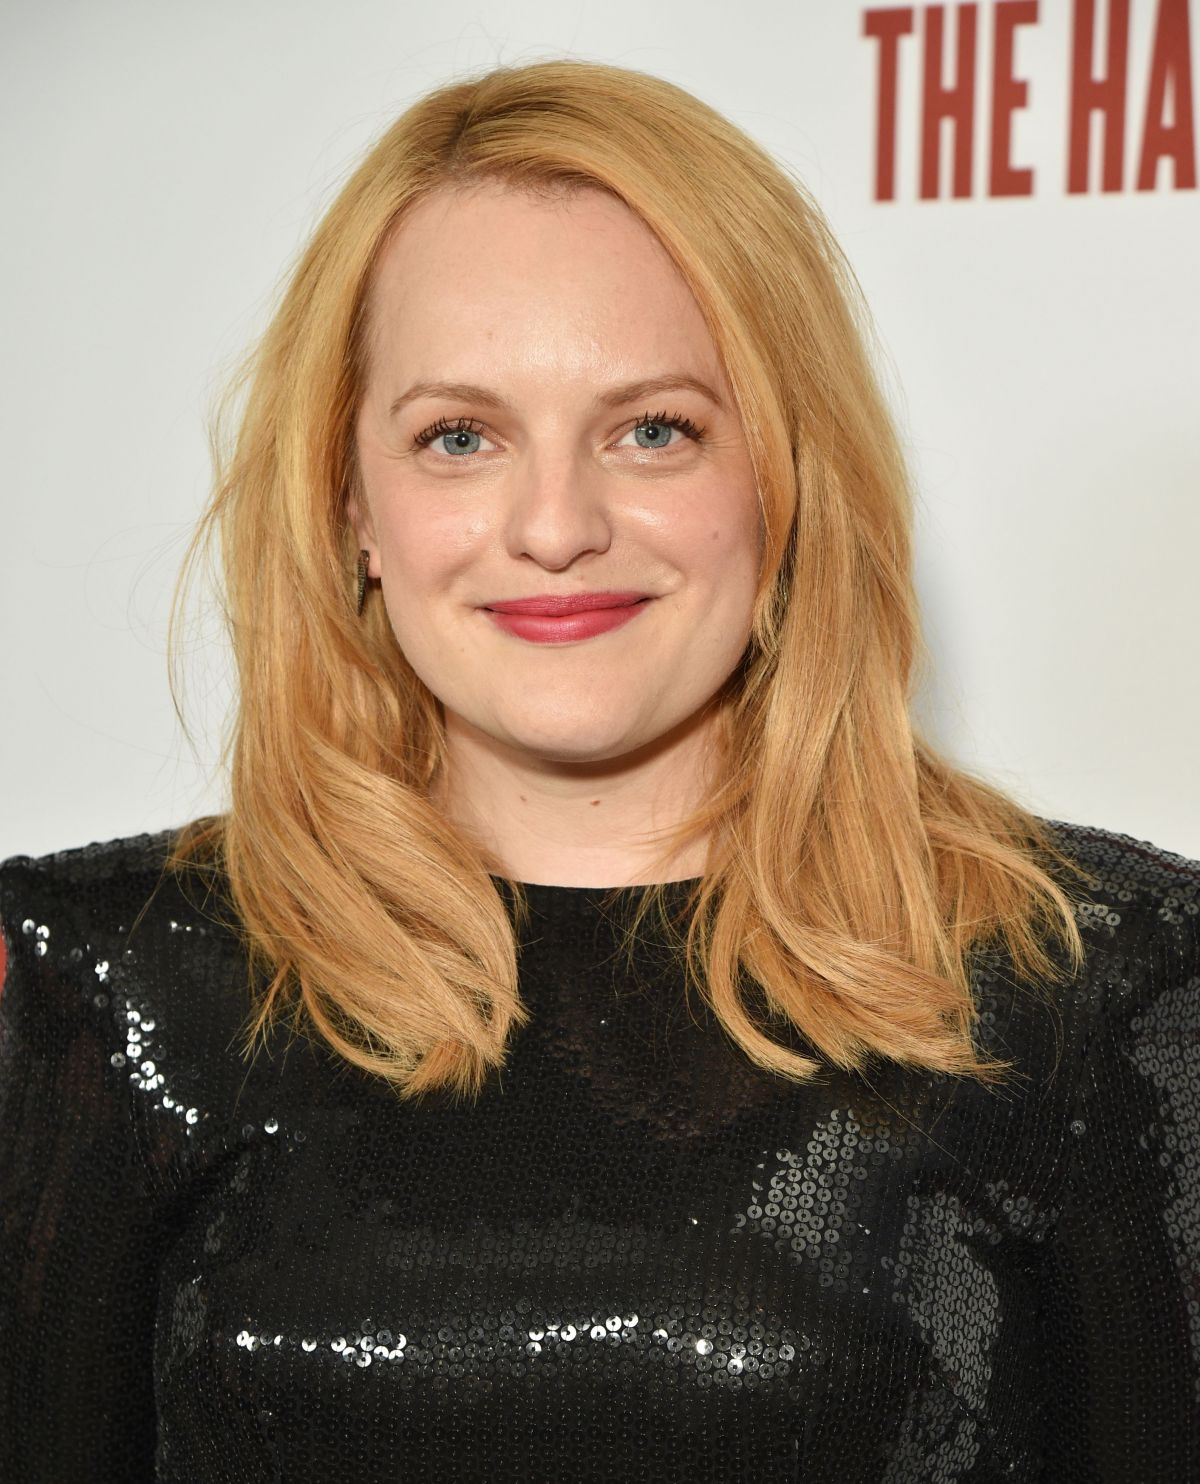 ELISABETH MOSS at The Handmaid’s Tale FYC Event in Los ...